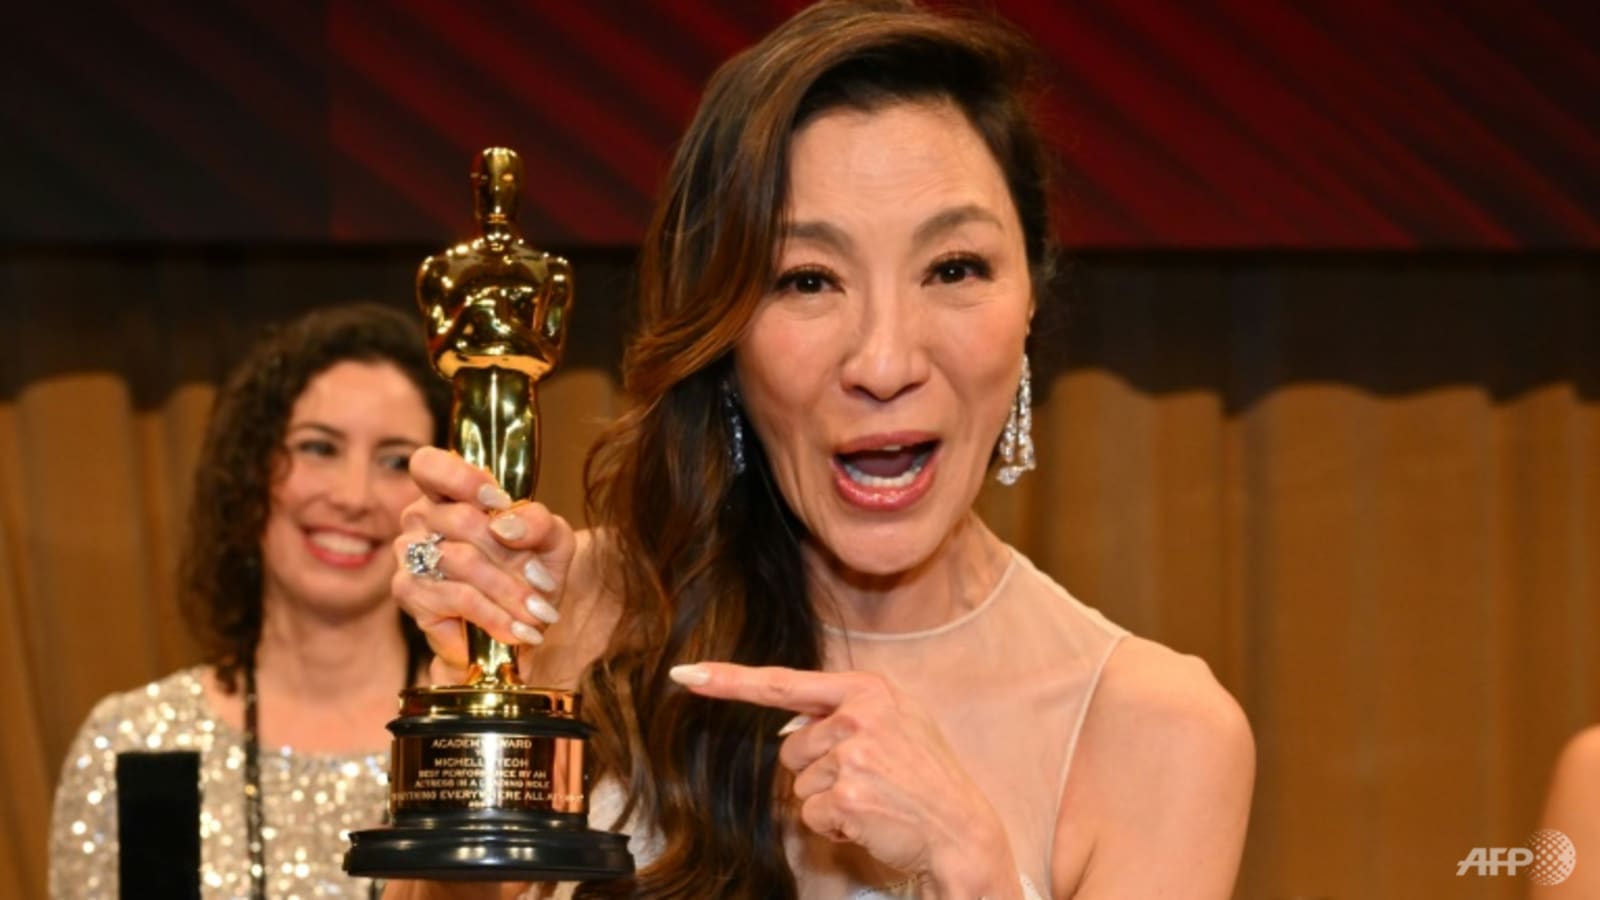 Public holiday in Malaysia after Michelle Yeoh's Oscar win? Fake news